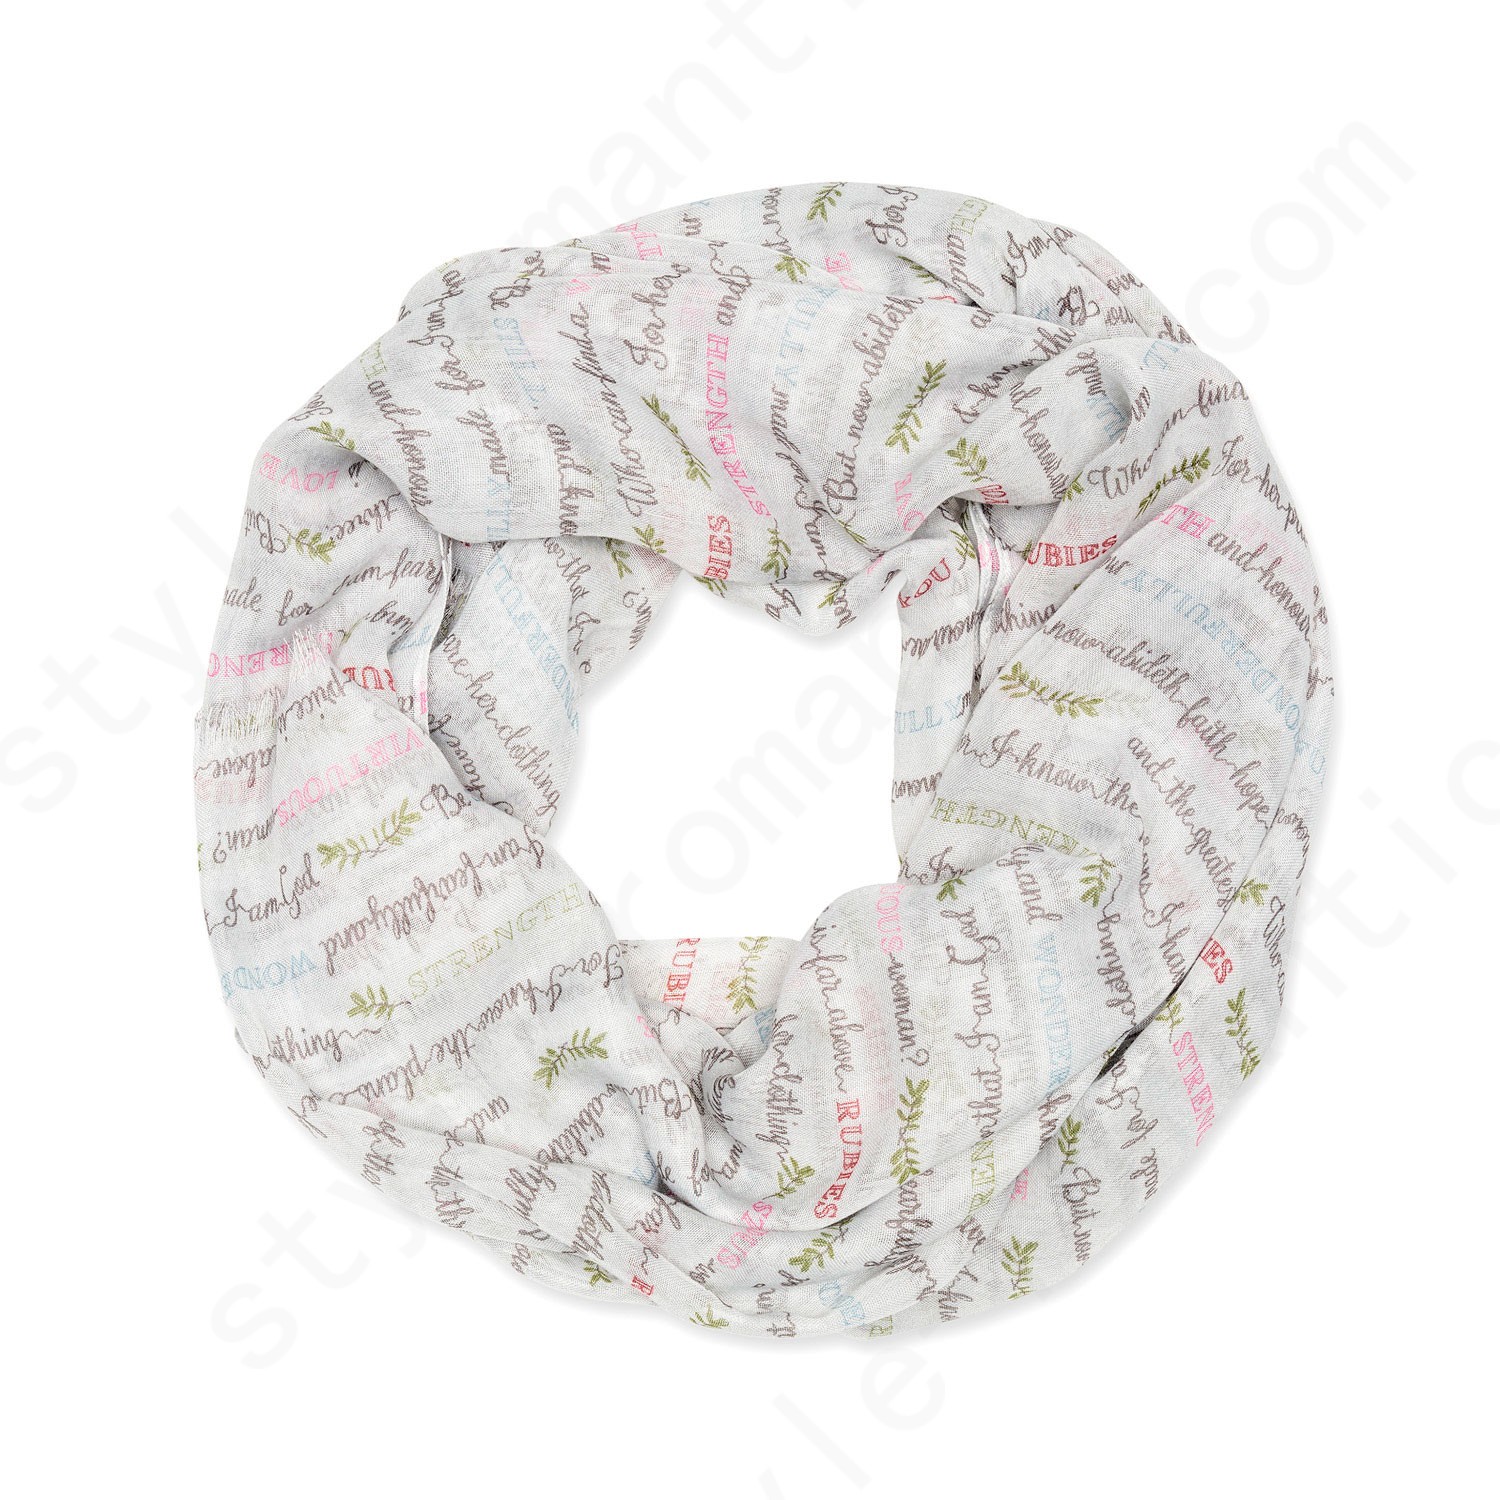 Thirty-One Gifts Avenue Scarf - Virtuous Verses - Thirty-One Gifts Avenue Scarf - Virtuous Verses